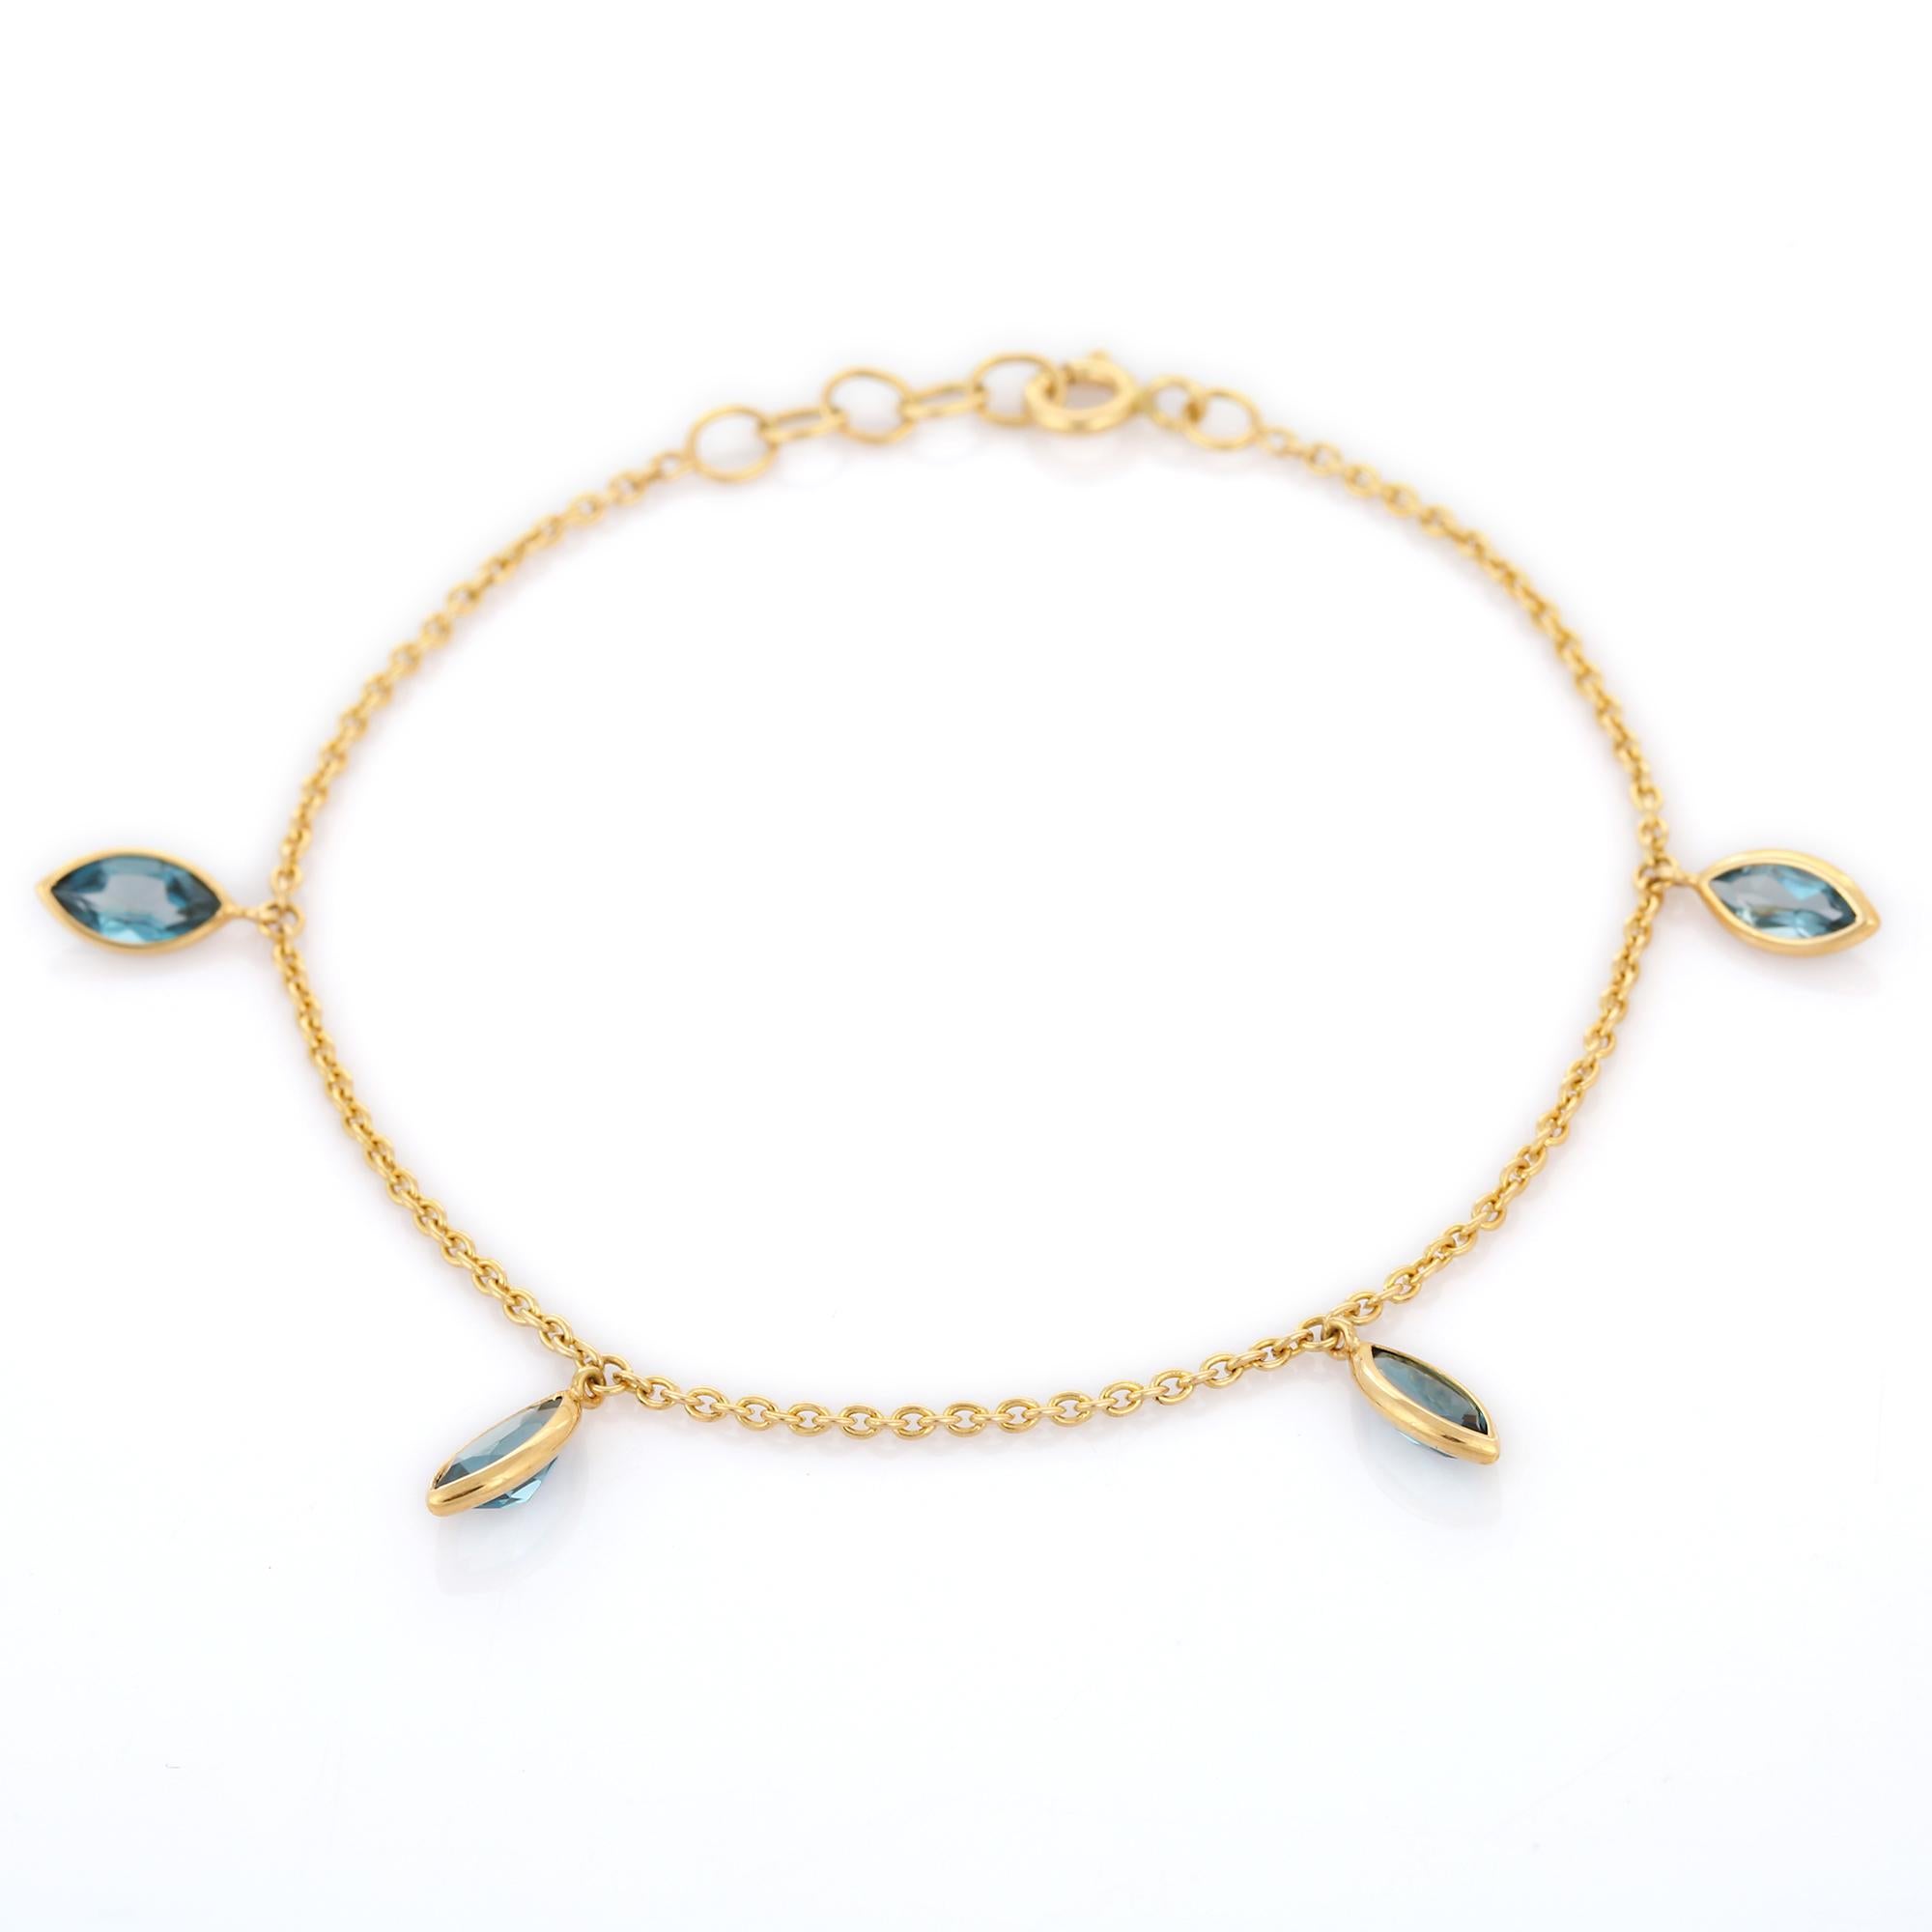 Marquise 2.54 Ct Blue Topaz Dangling Charm Bracelet Inlaid in 18K Yellow Gold In New Condition For Sale In Houston, TX